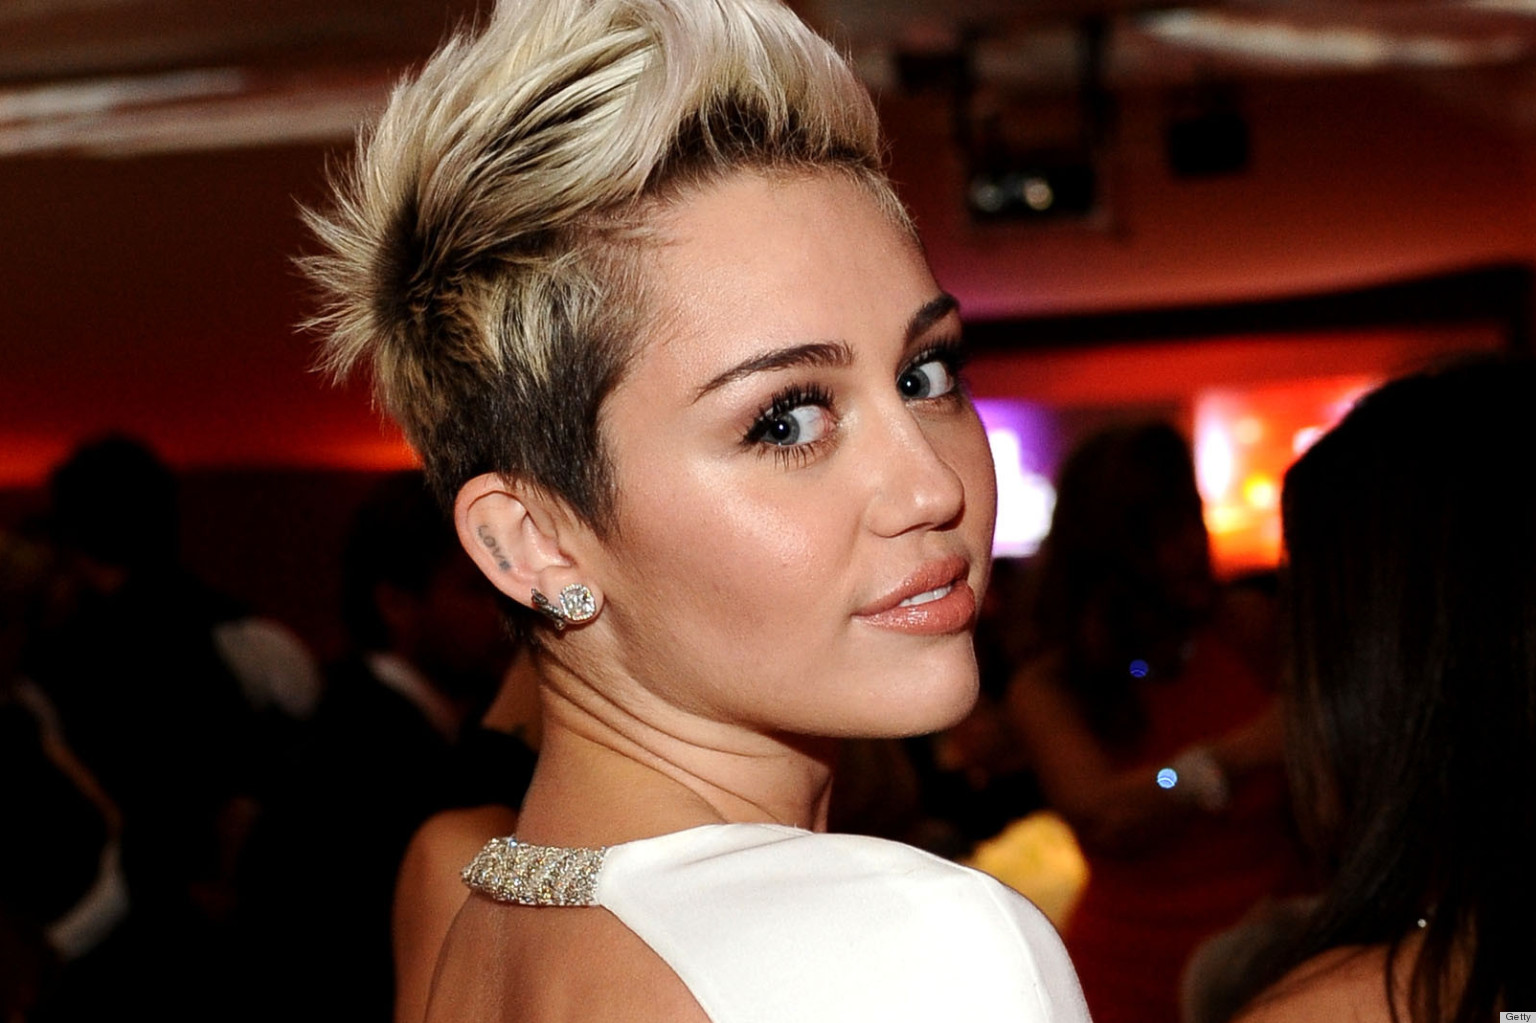 Miley Cyrus Tattoo Provides Window Into Her Love Life, Possible Split (PHOTO)